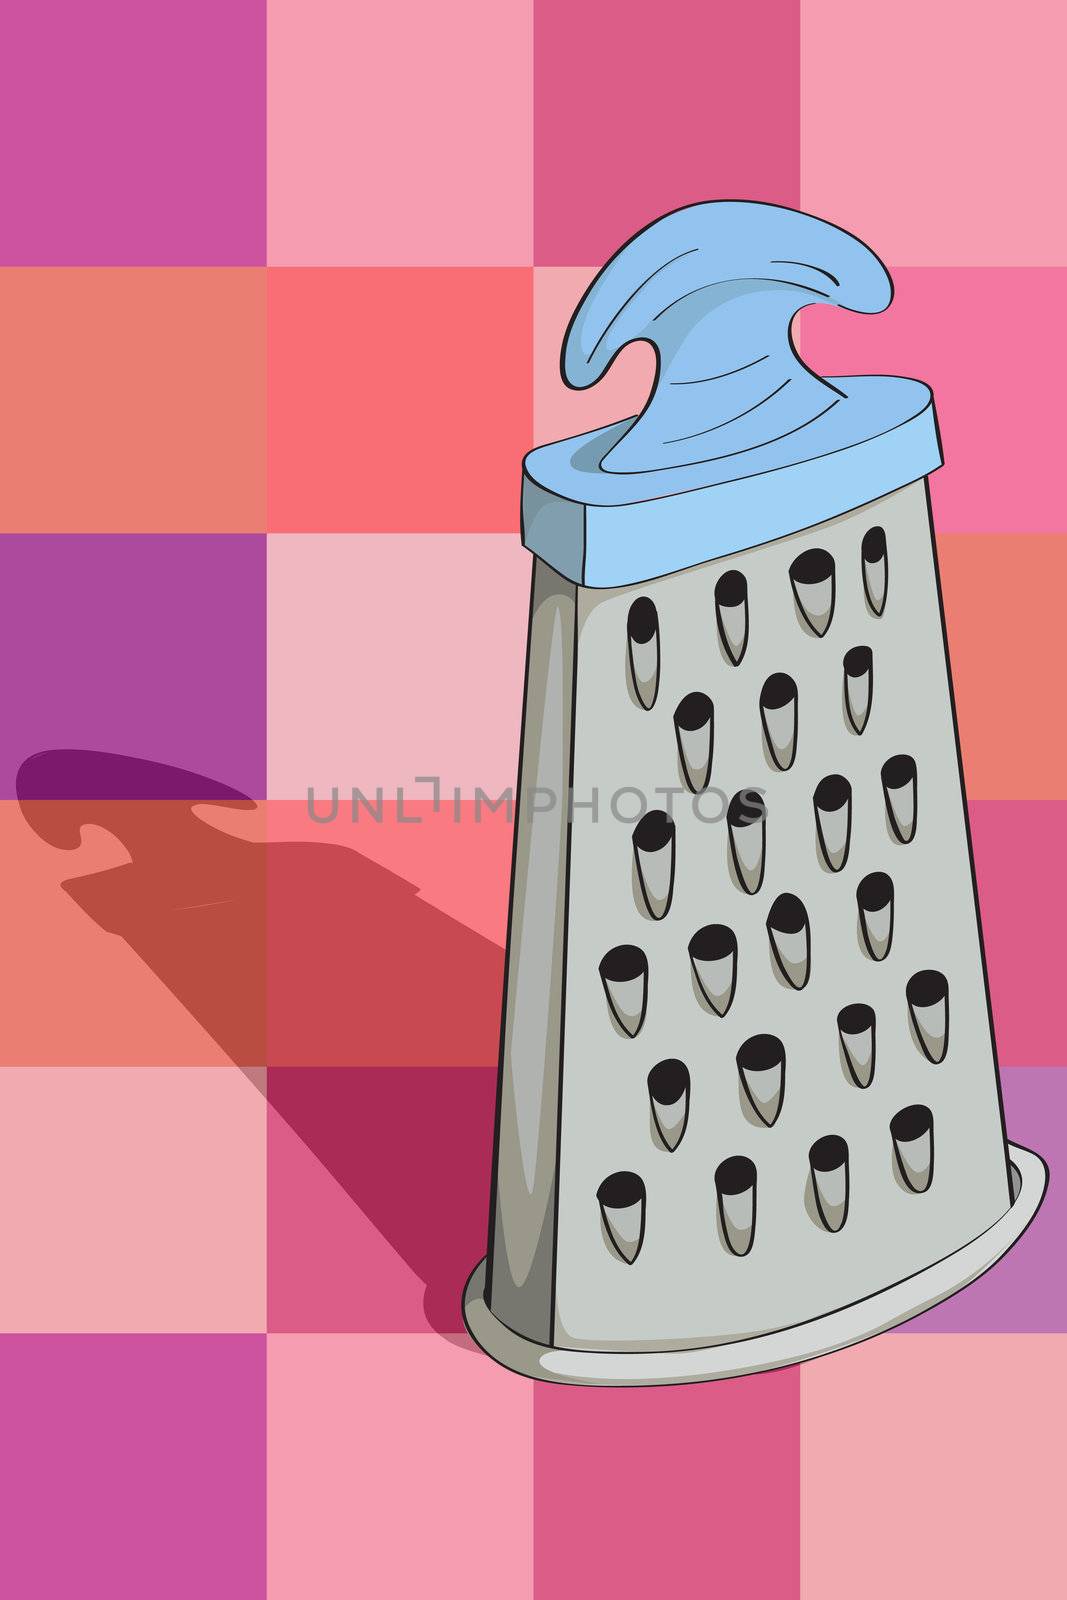 hand drawn illustration of a grater over a kitchen pattern with squares